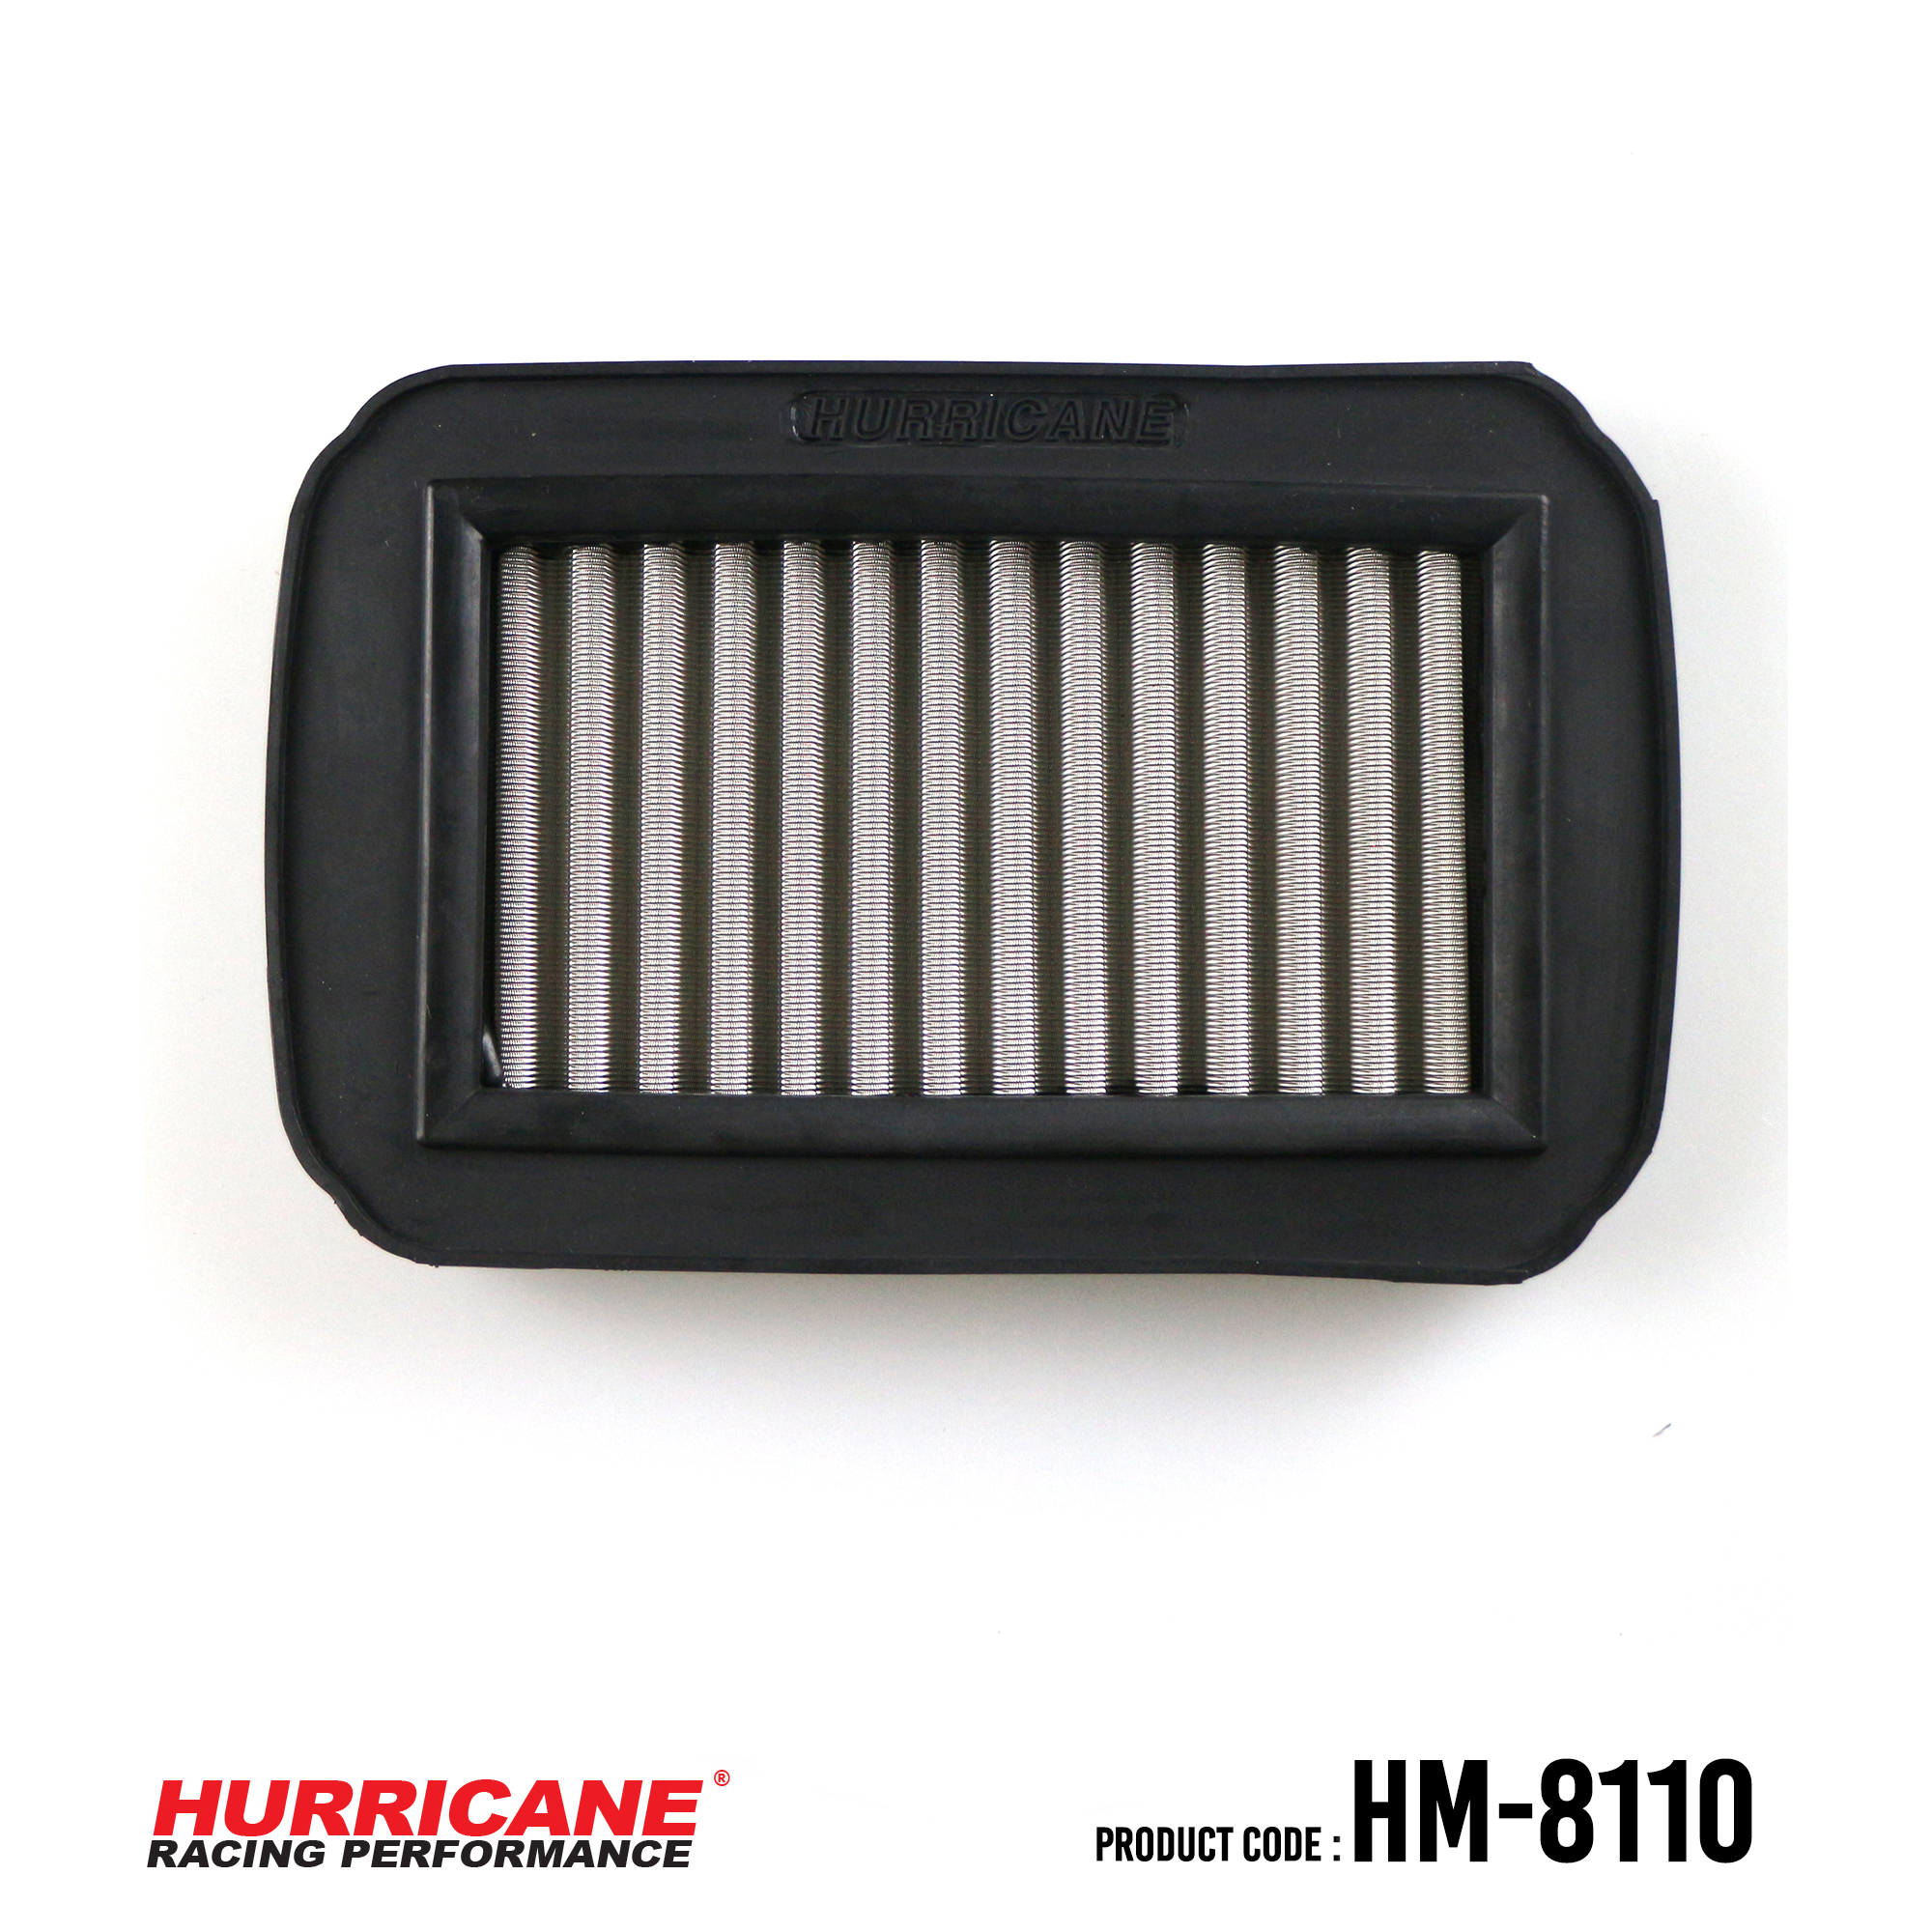 HURRICANE STAINLESS STEEL AIR FILTER FOR HM-8110 Yamaha